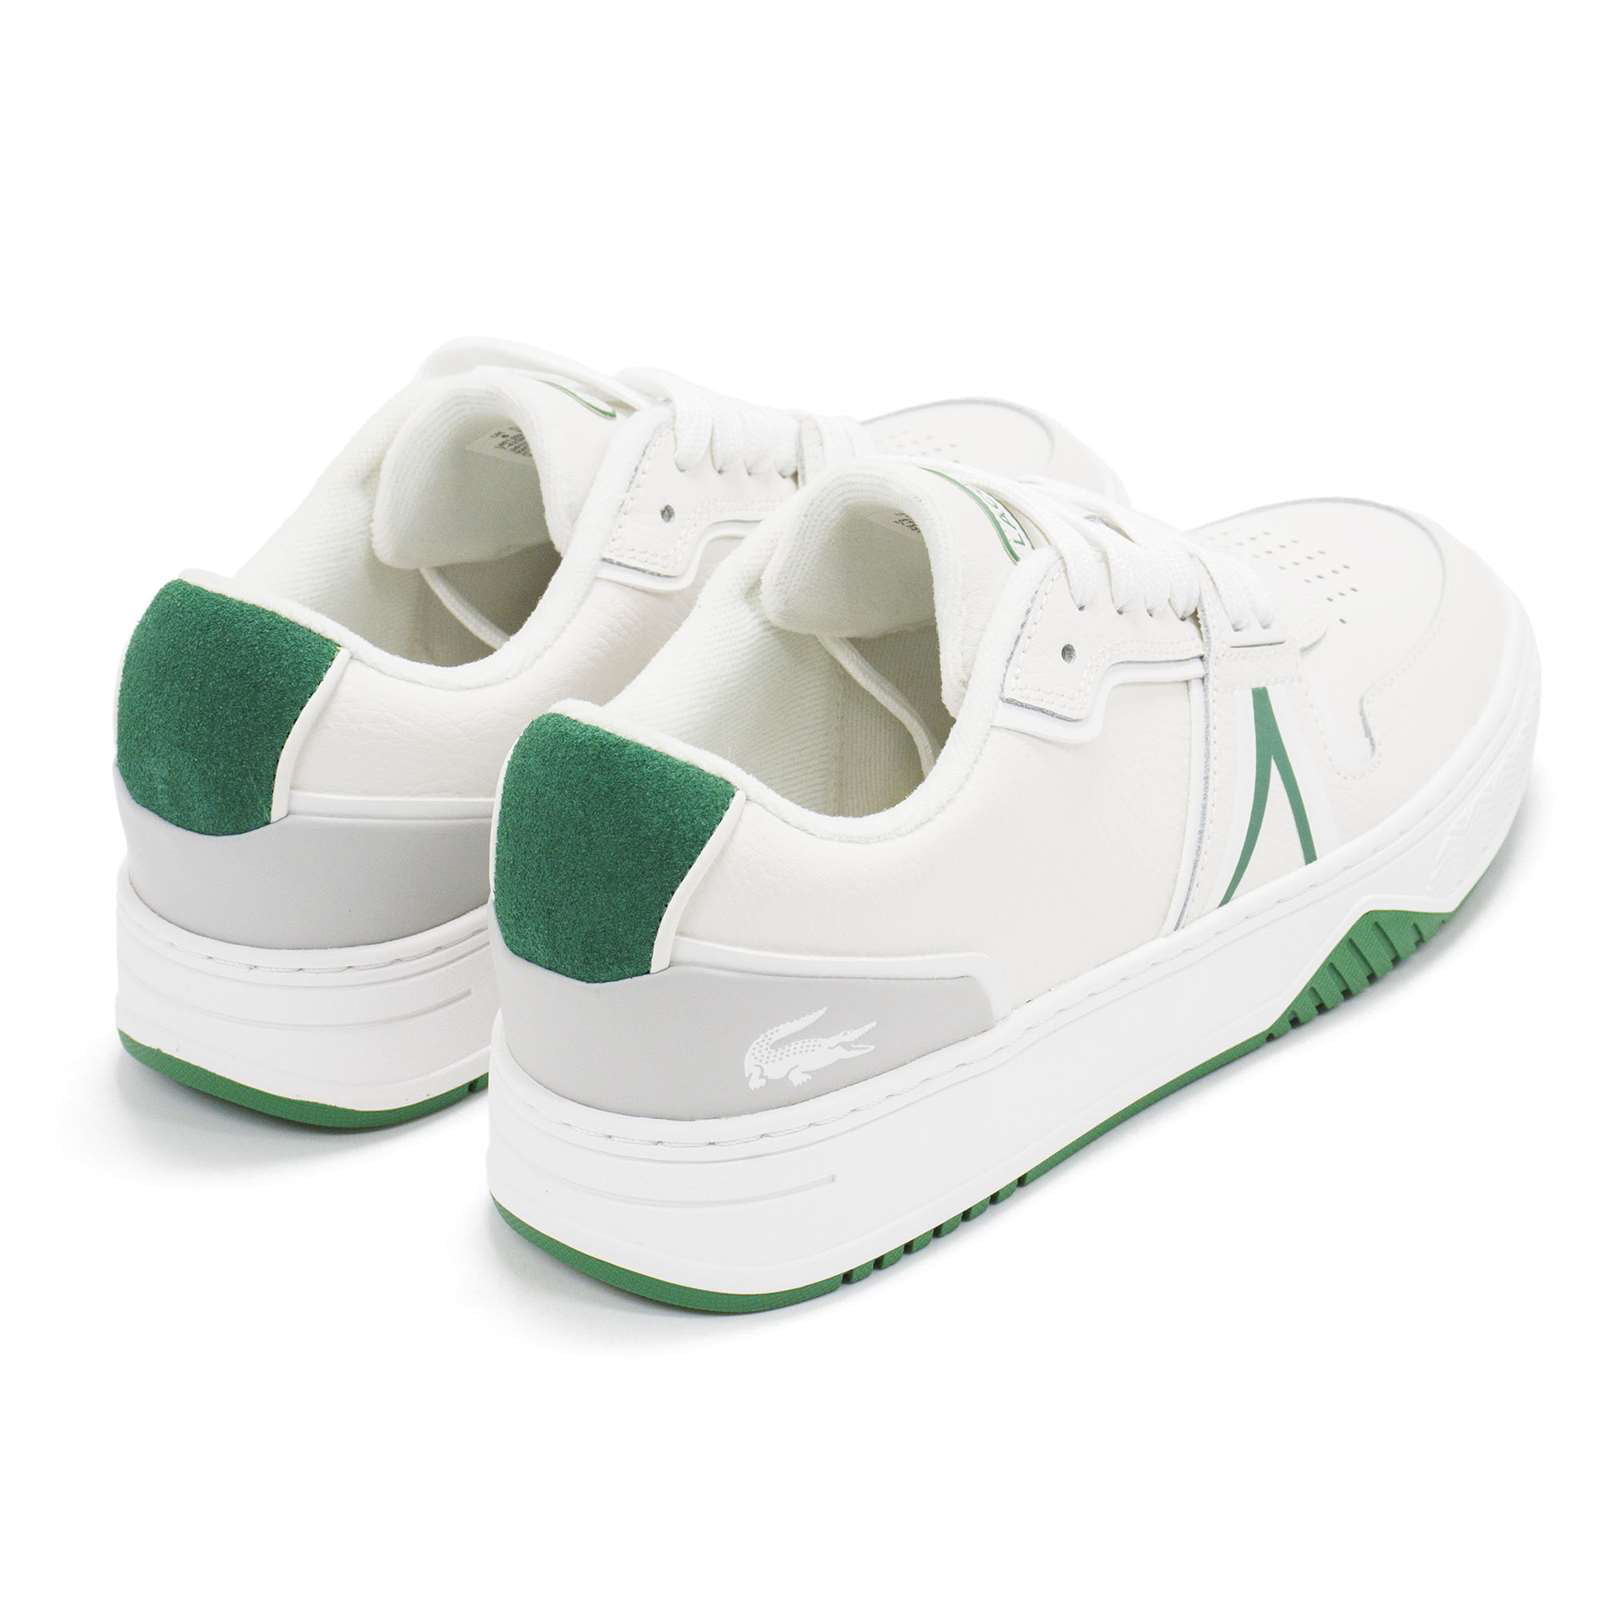 Mens Sneakers 11 White/Green -